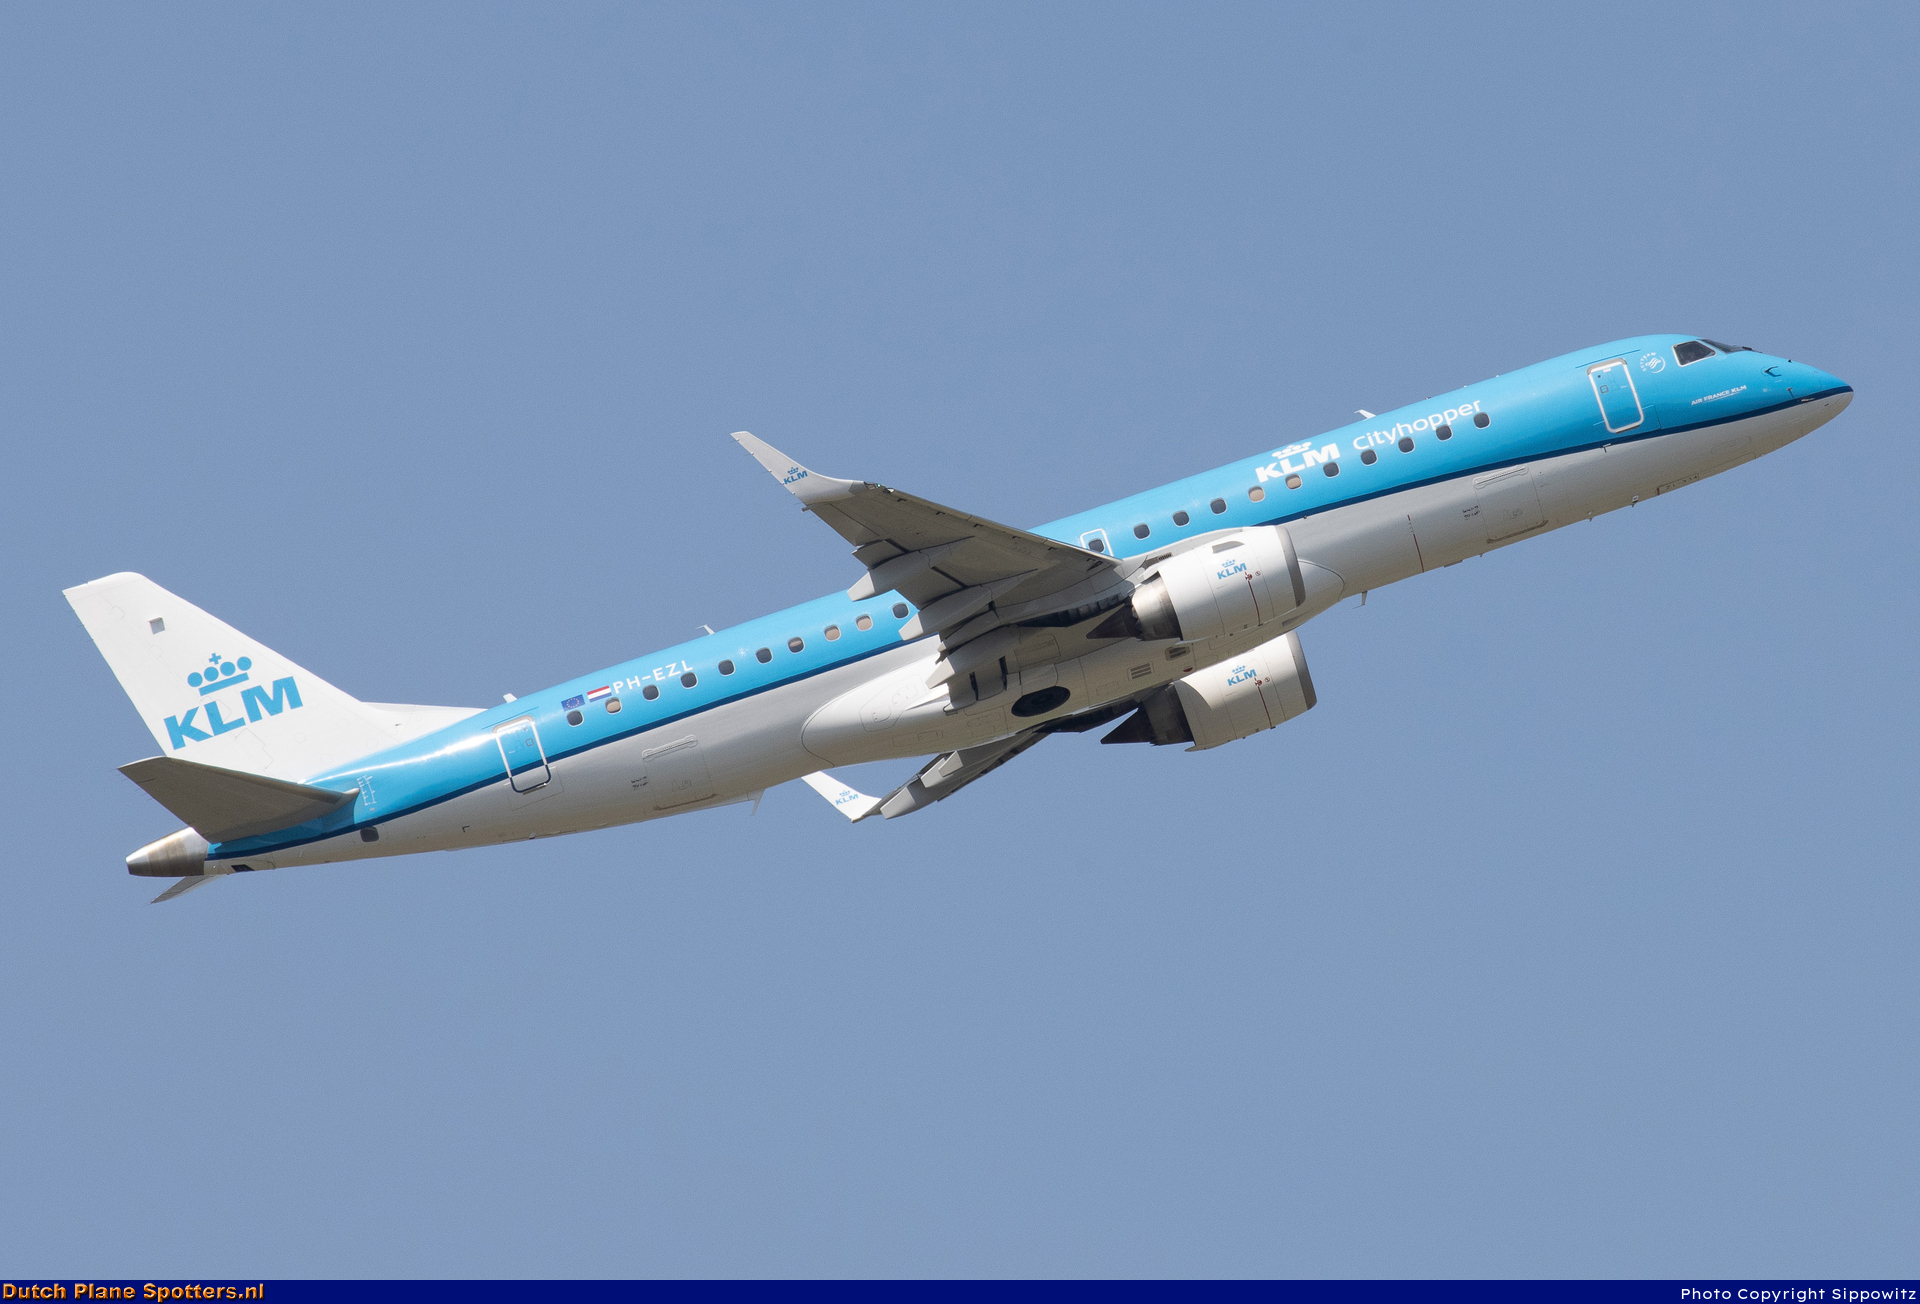 PH-EZL Embraer 190 KLM Cityhopper by Sippowitz